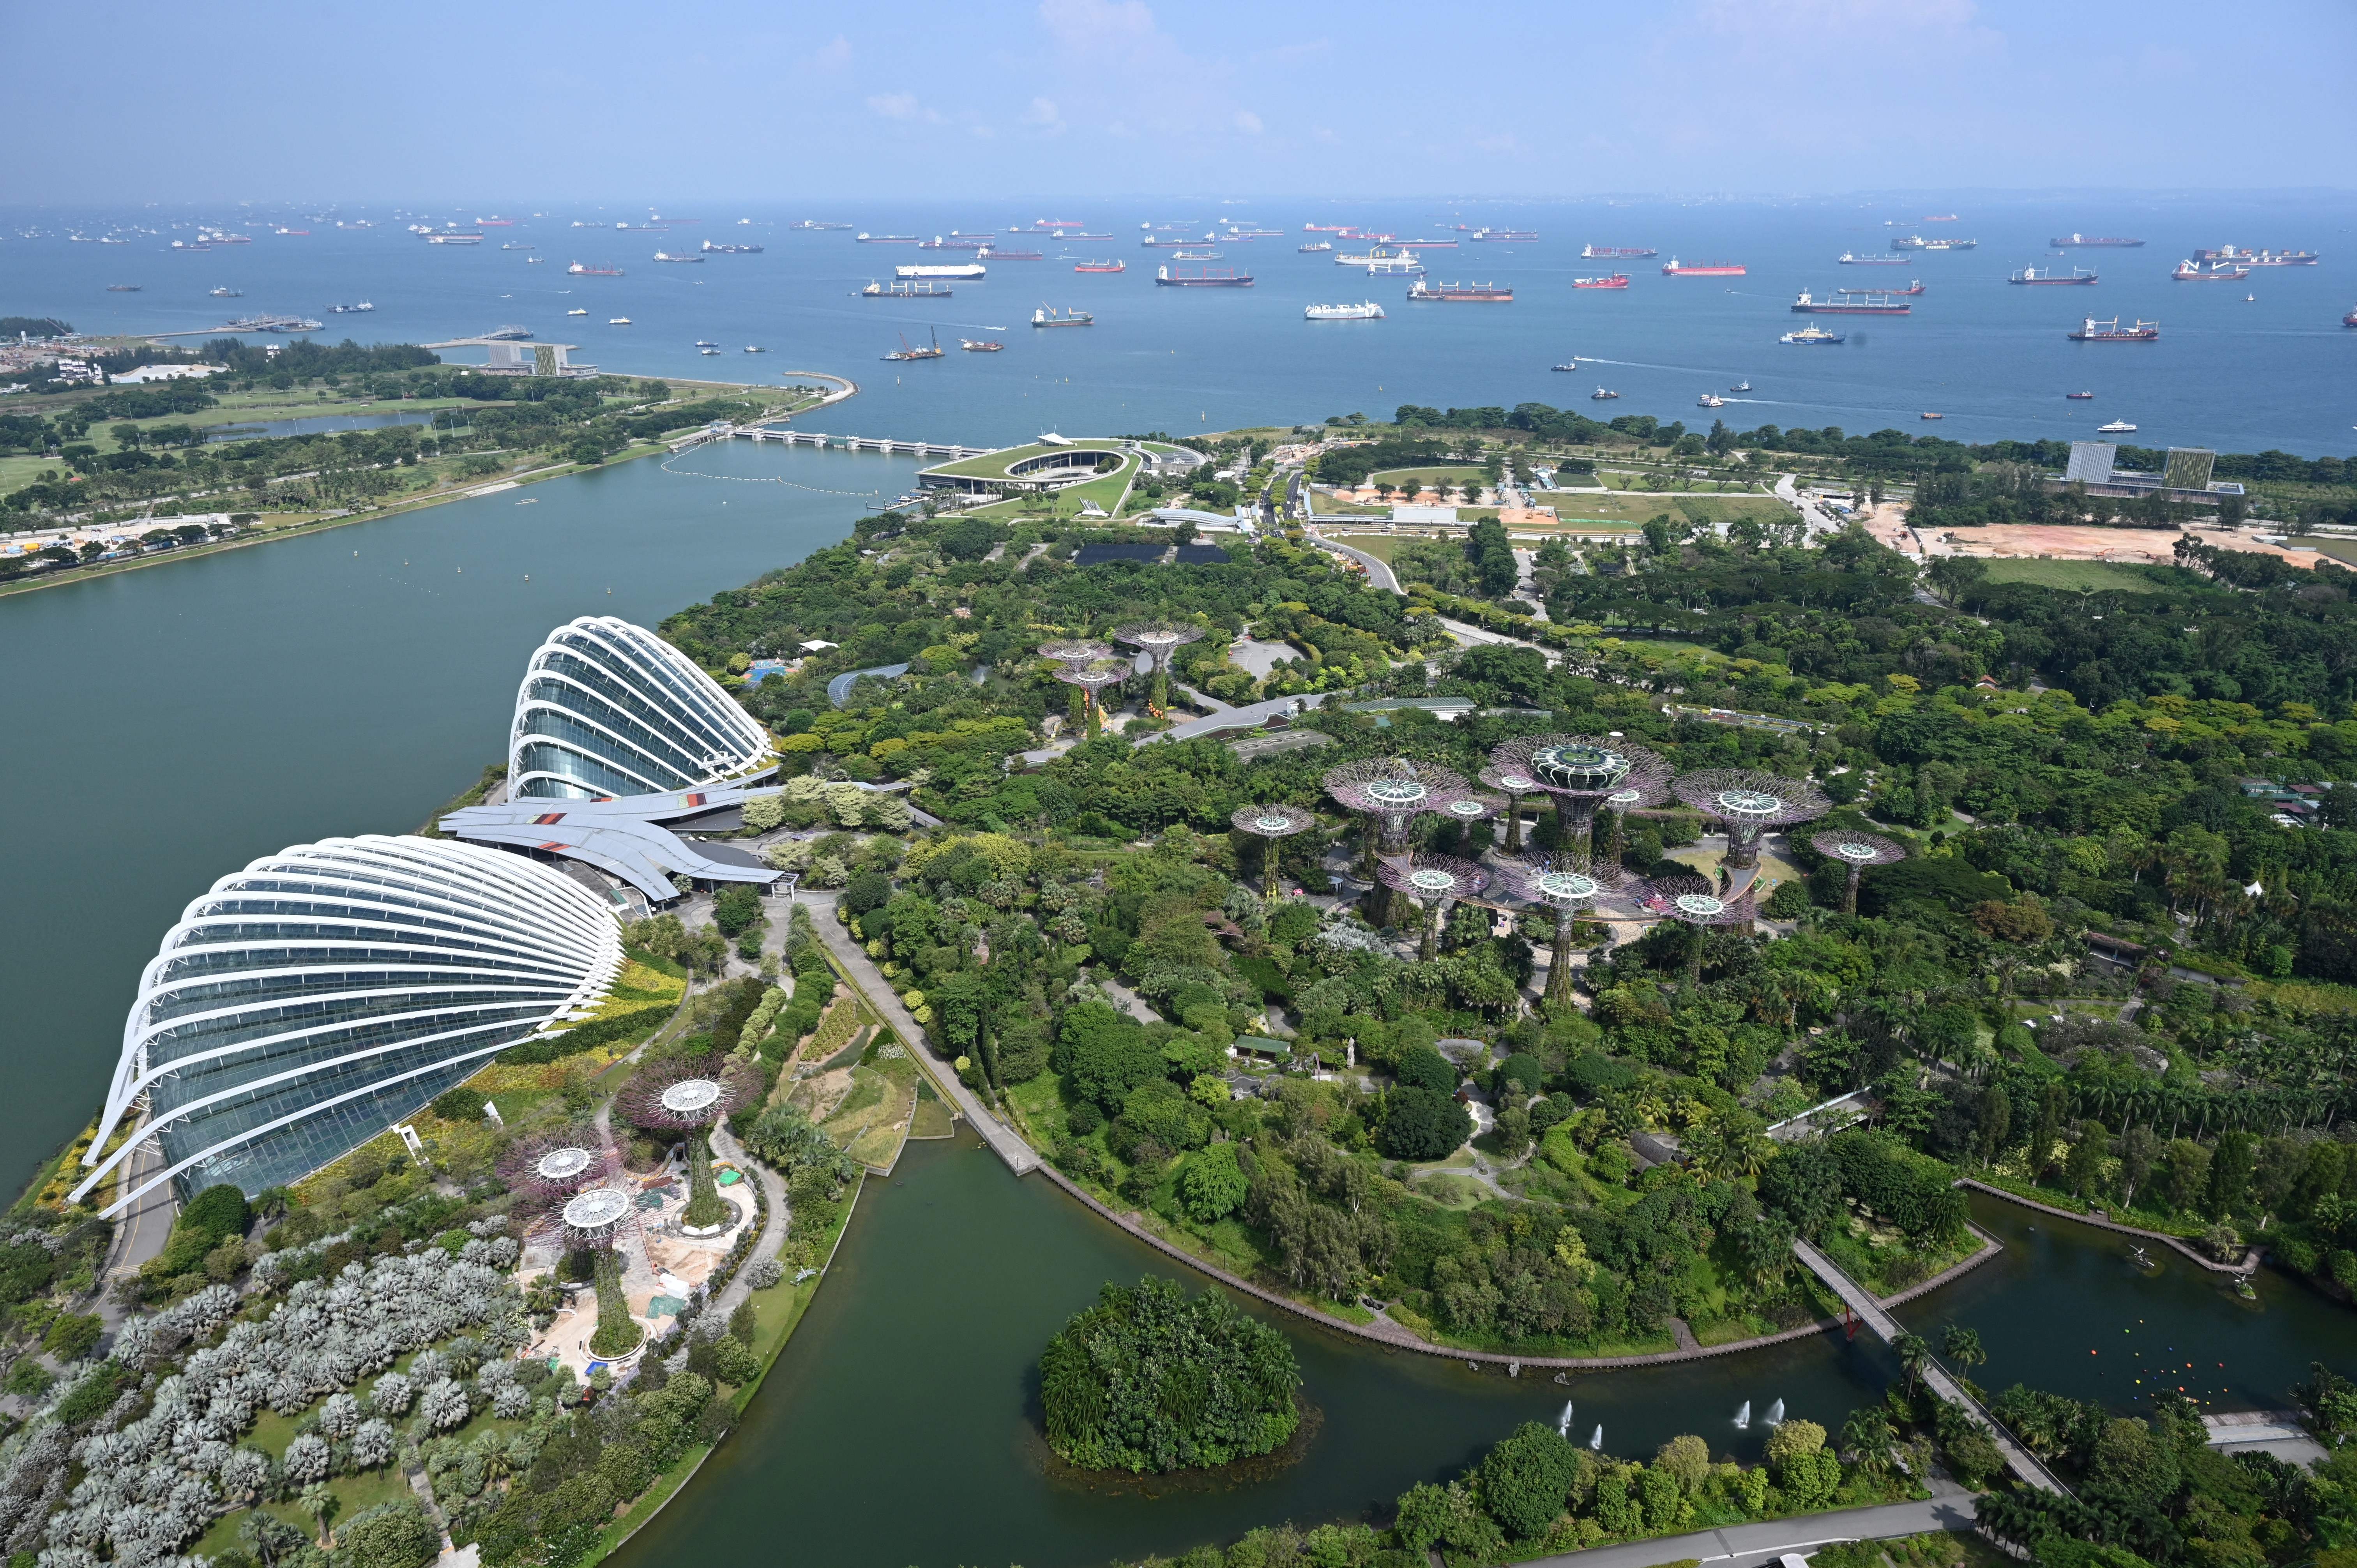 Gardens by the Bay is a must-see attraction in the heart of Singapore